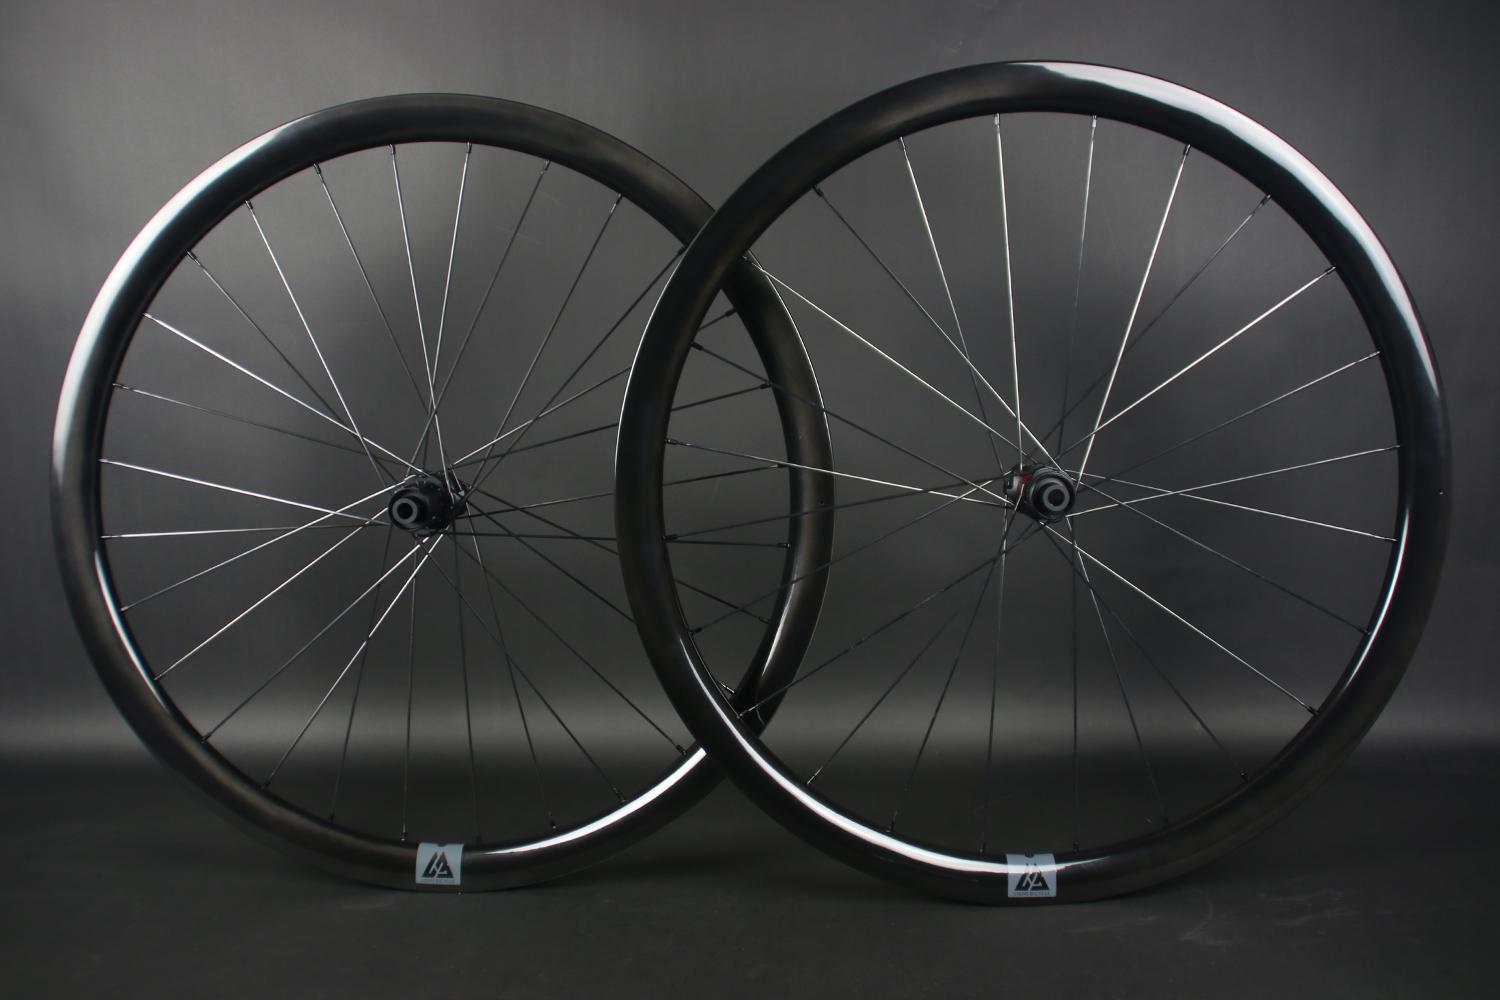 light-bicycle-wr35-disc-carbon-wheelset-cannondale-ai-6mm-offset-lacing-rear